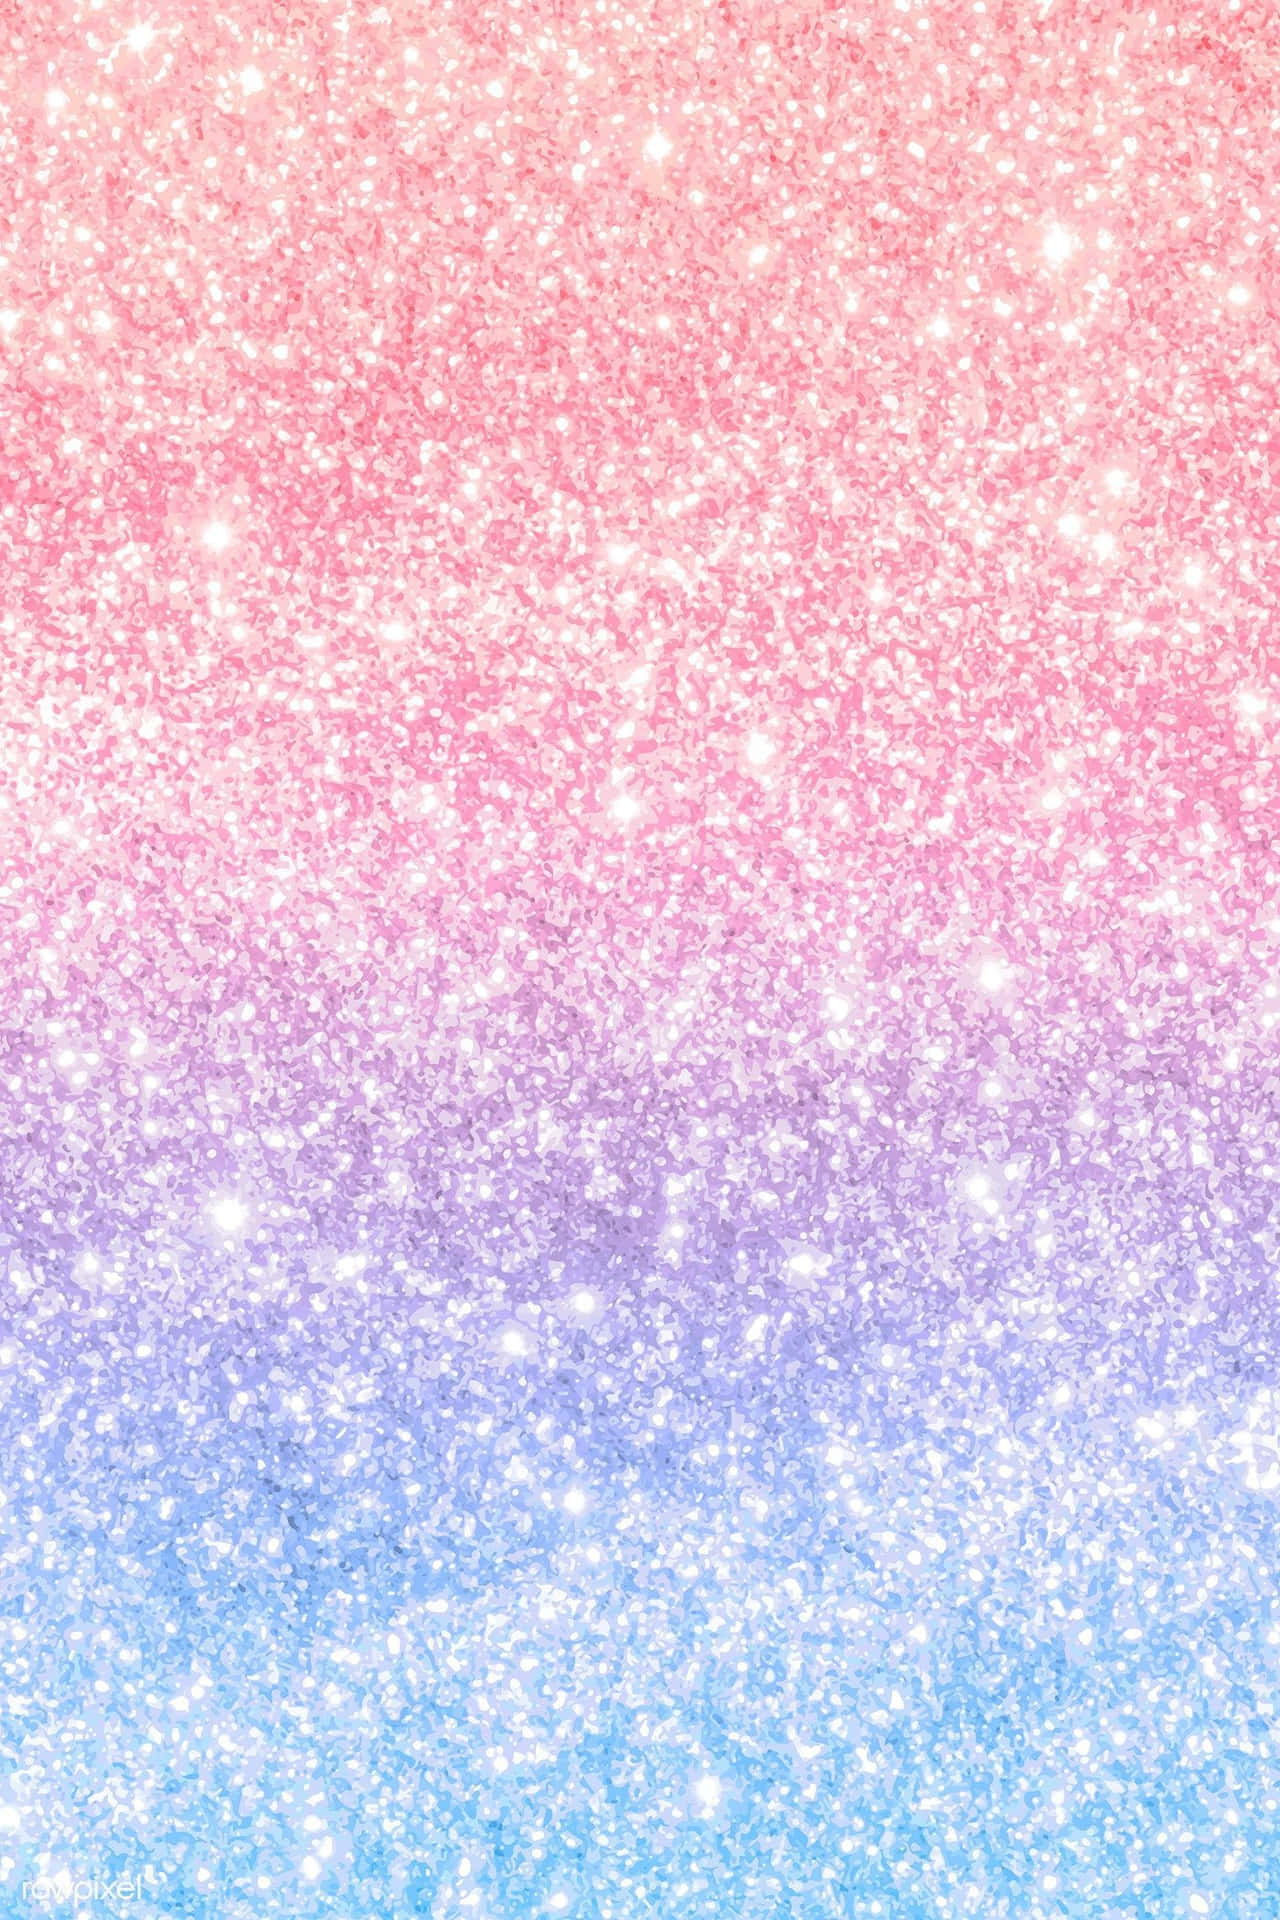 Blue And Pink Sparkly Glitters Background